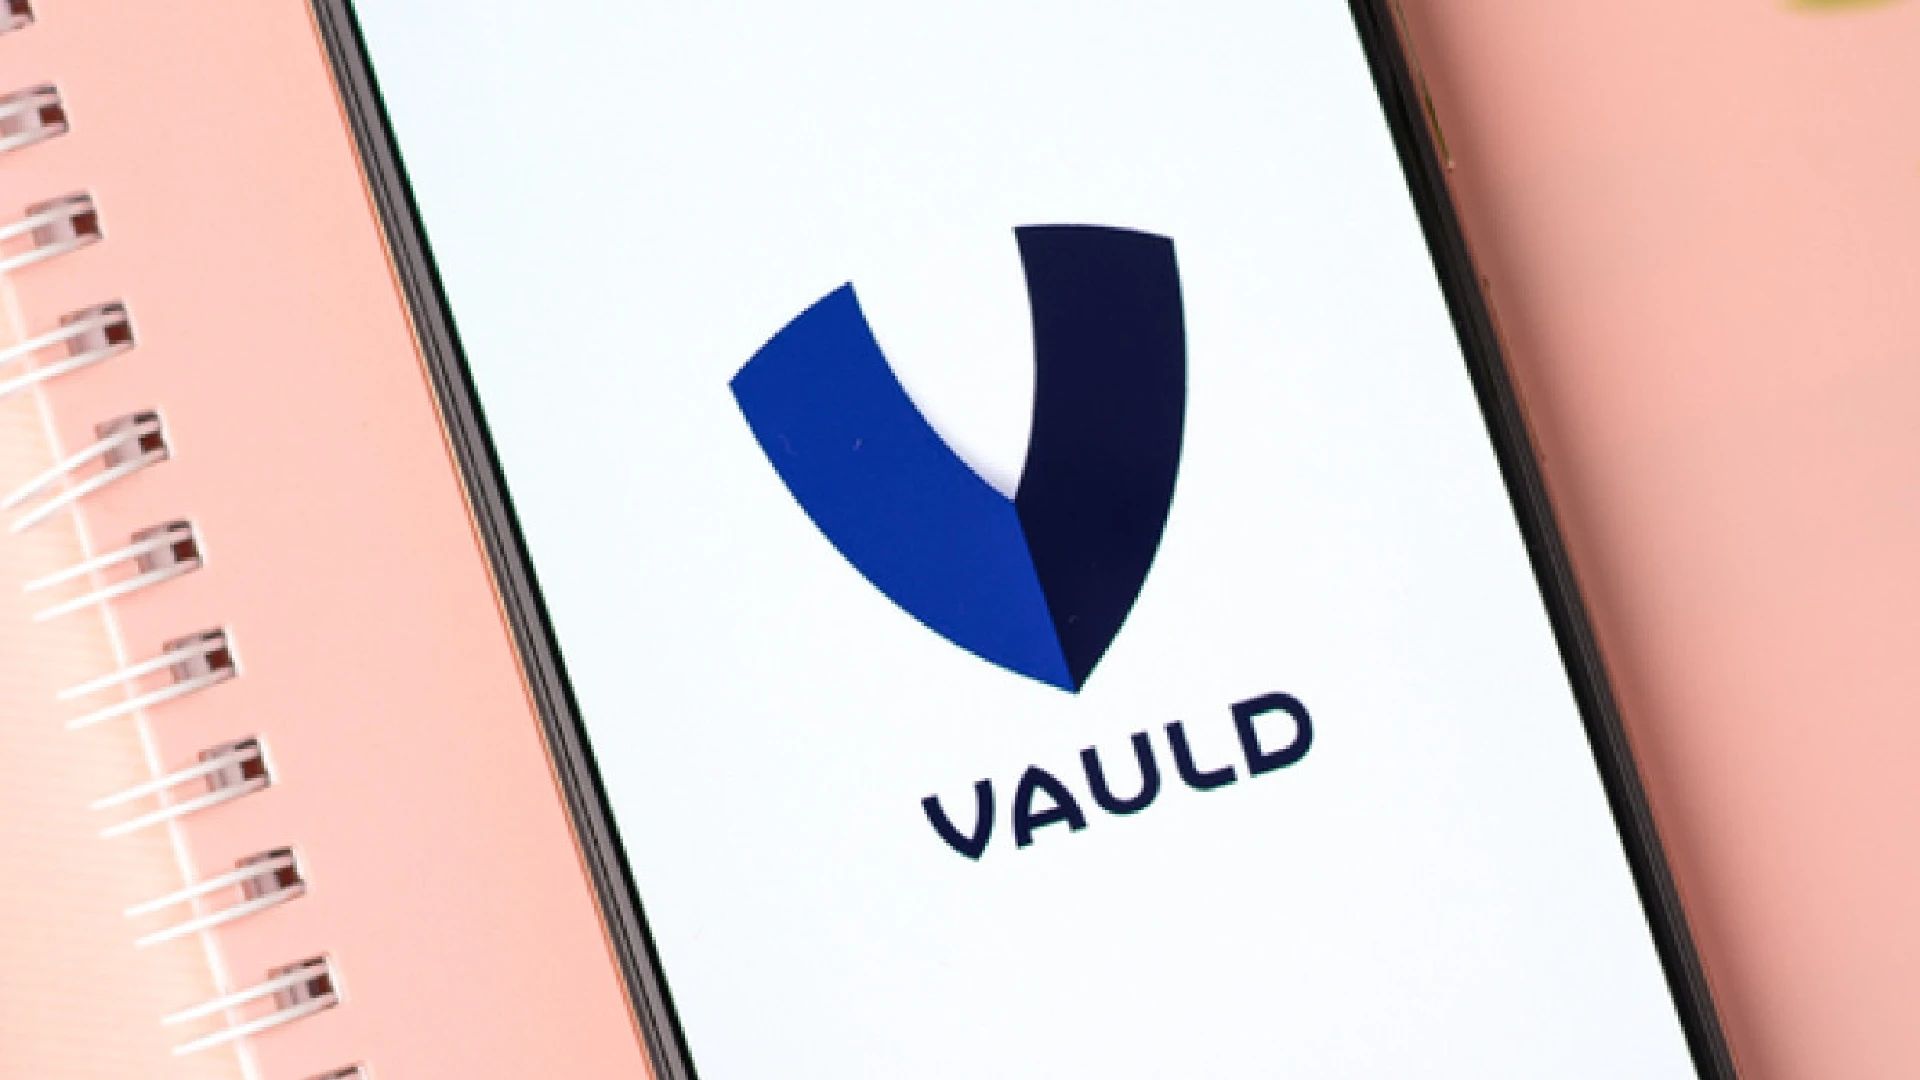 In this article, we are going to be going over Vauld cryptocurrency financial challenges, as the decrease in bitcoin prices affects the whole crypto market.